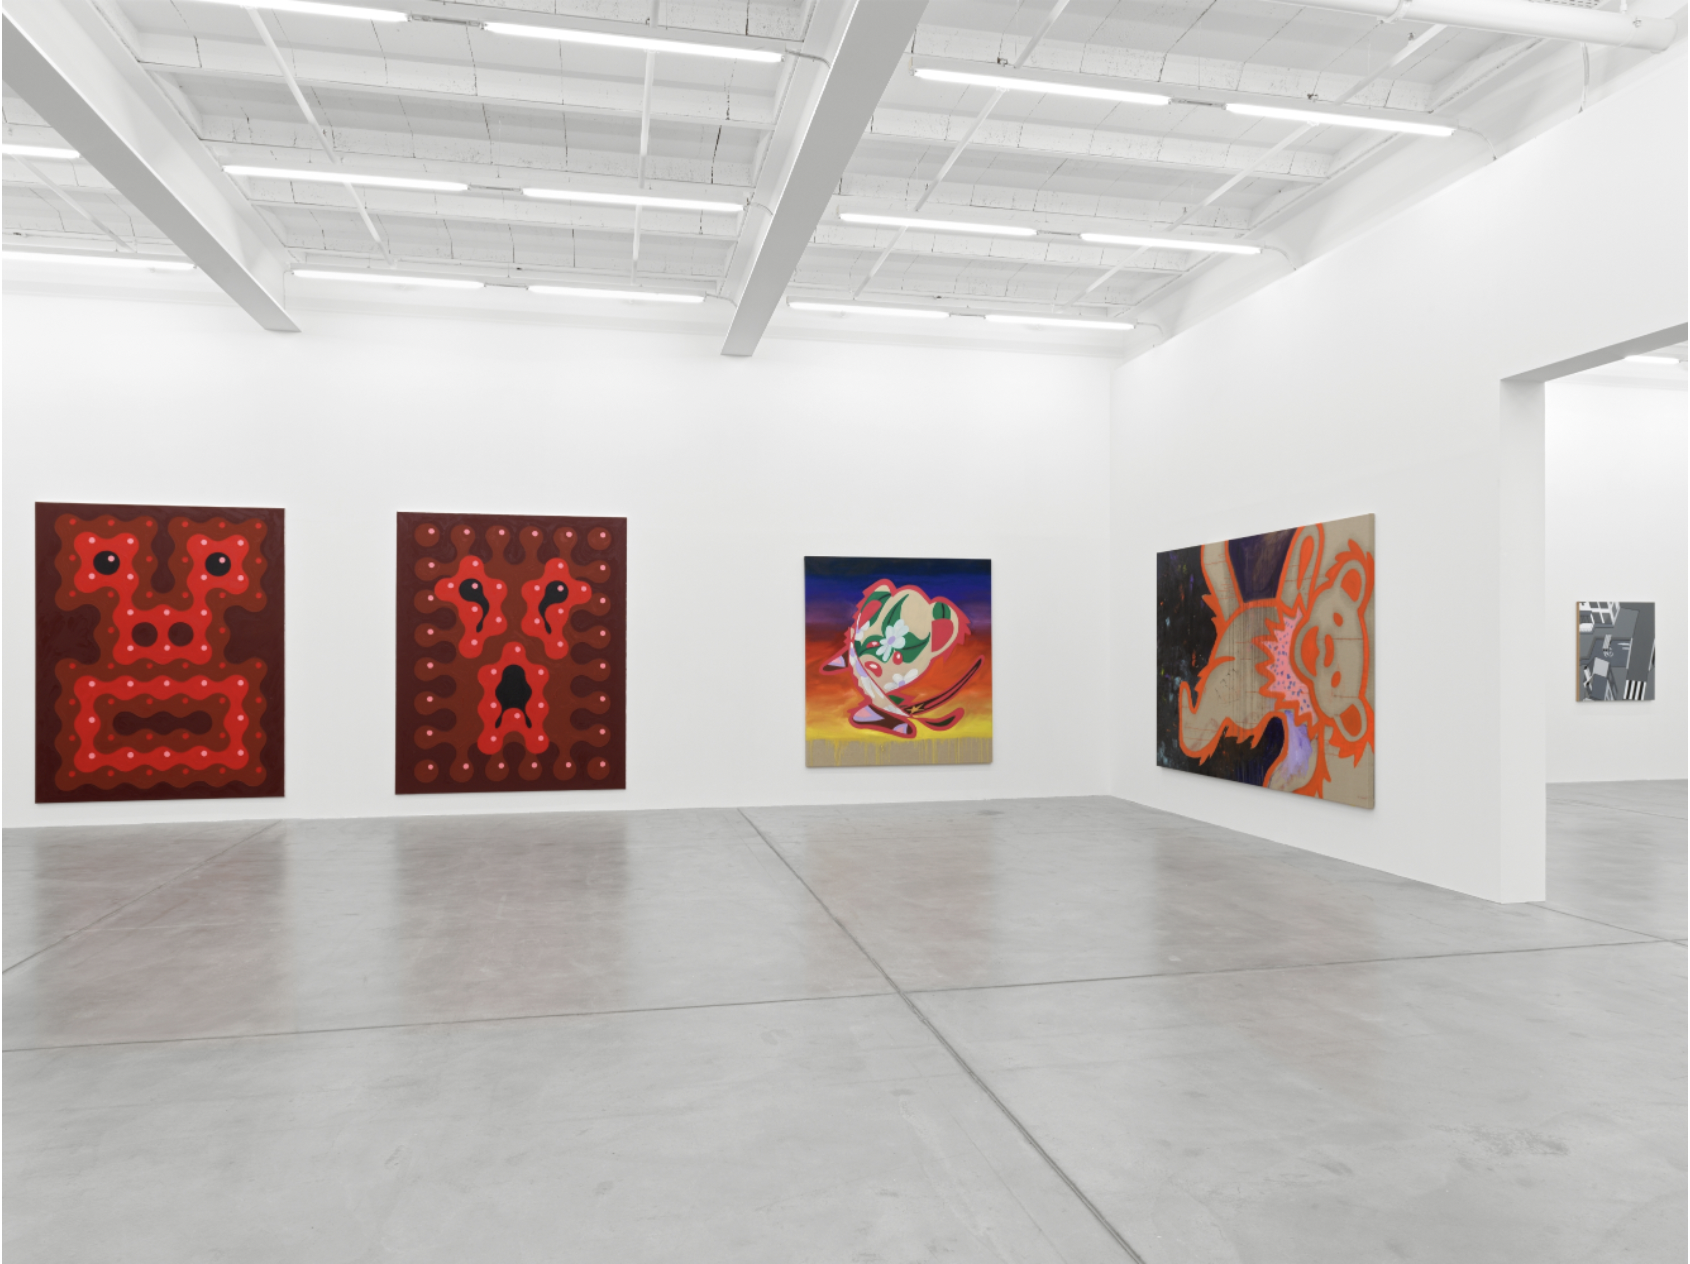 Installation view with works by Anton Bruhin, Tina Braegger, and Othmar Farré